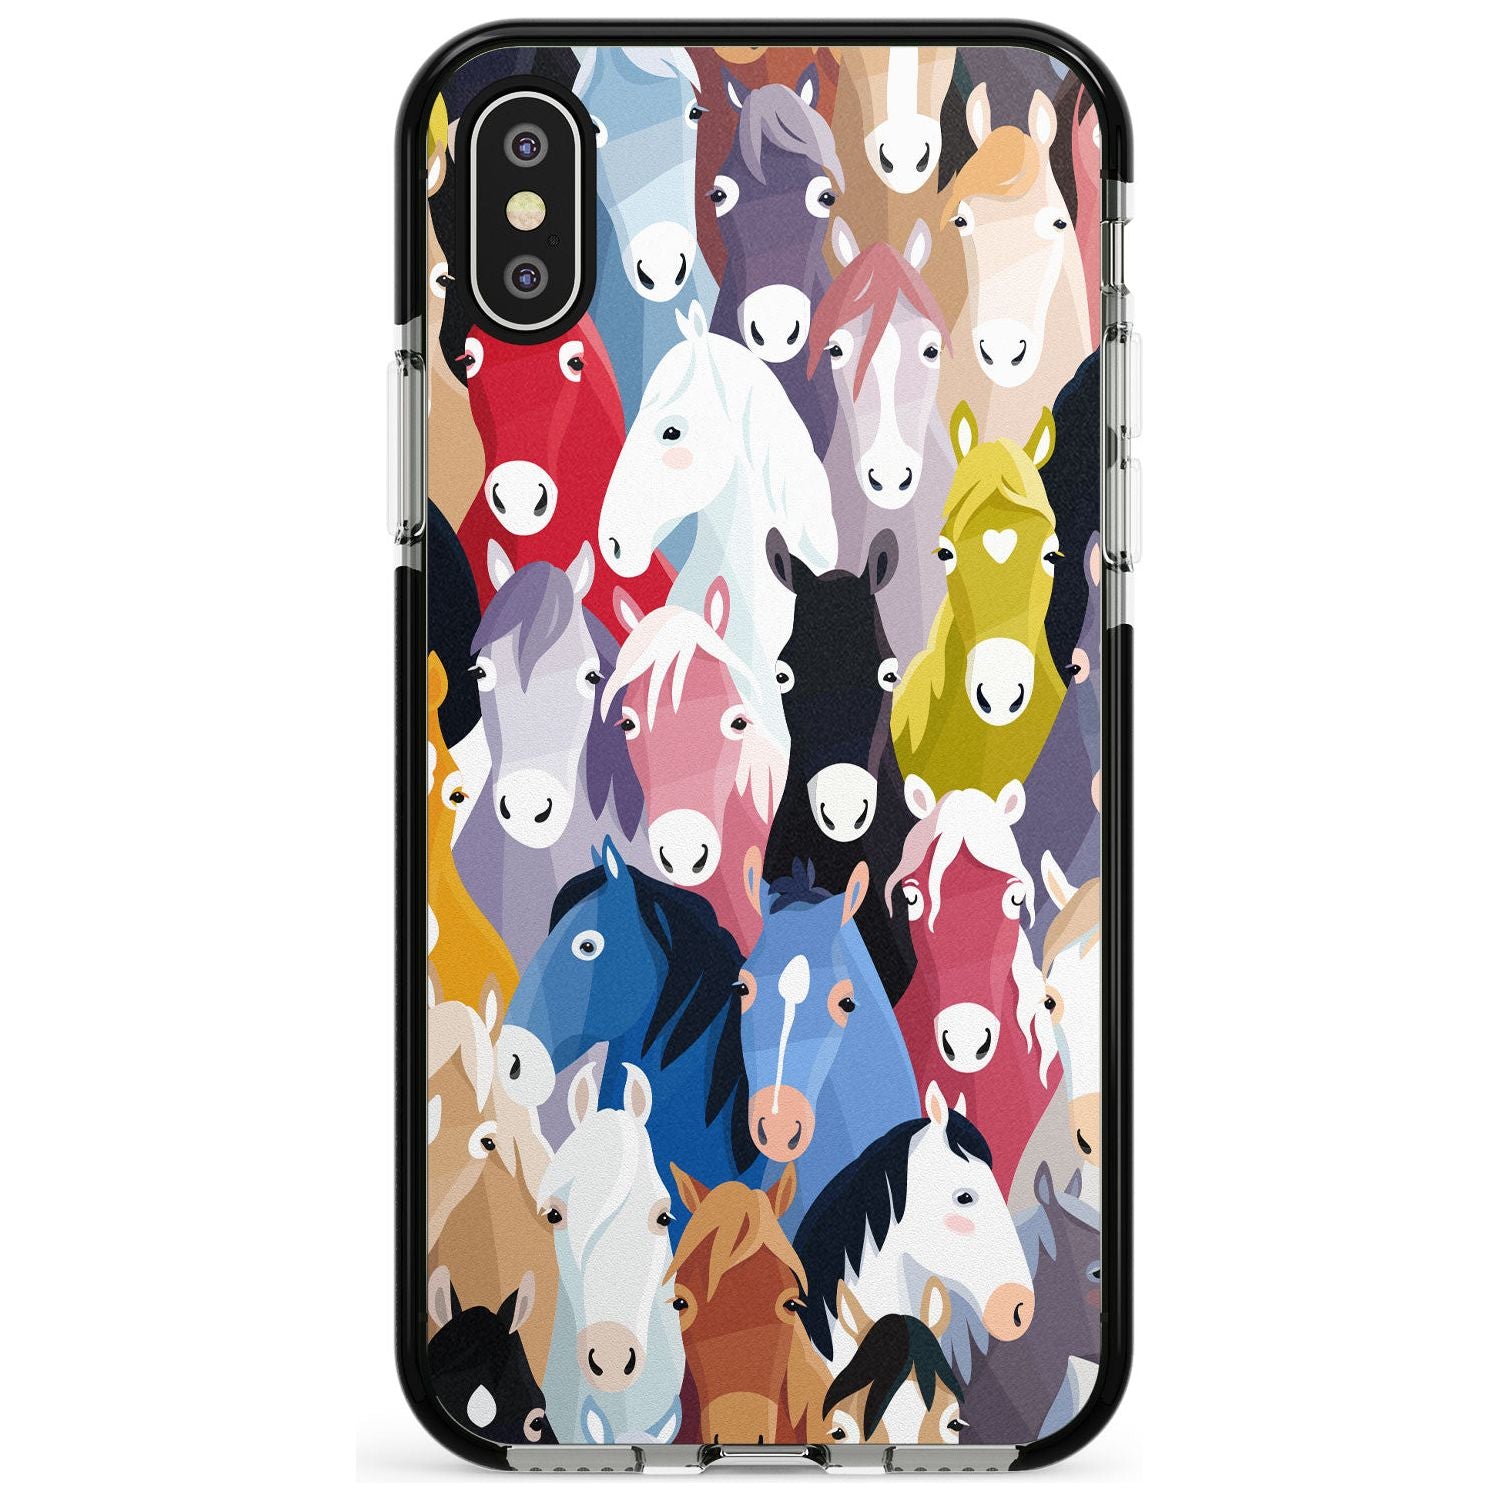 Colourful Horse Pattern Black Impact Phone Case for iPhone X XS Max XR